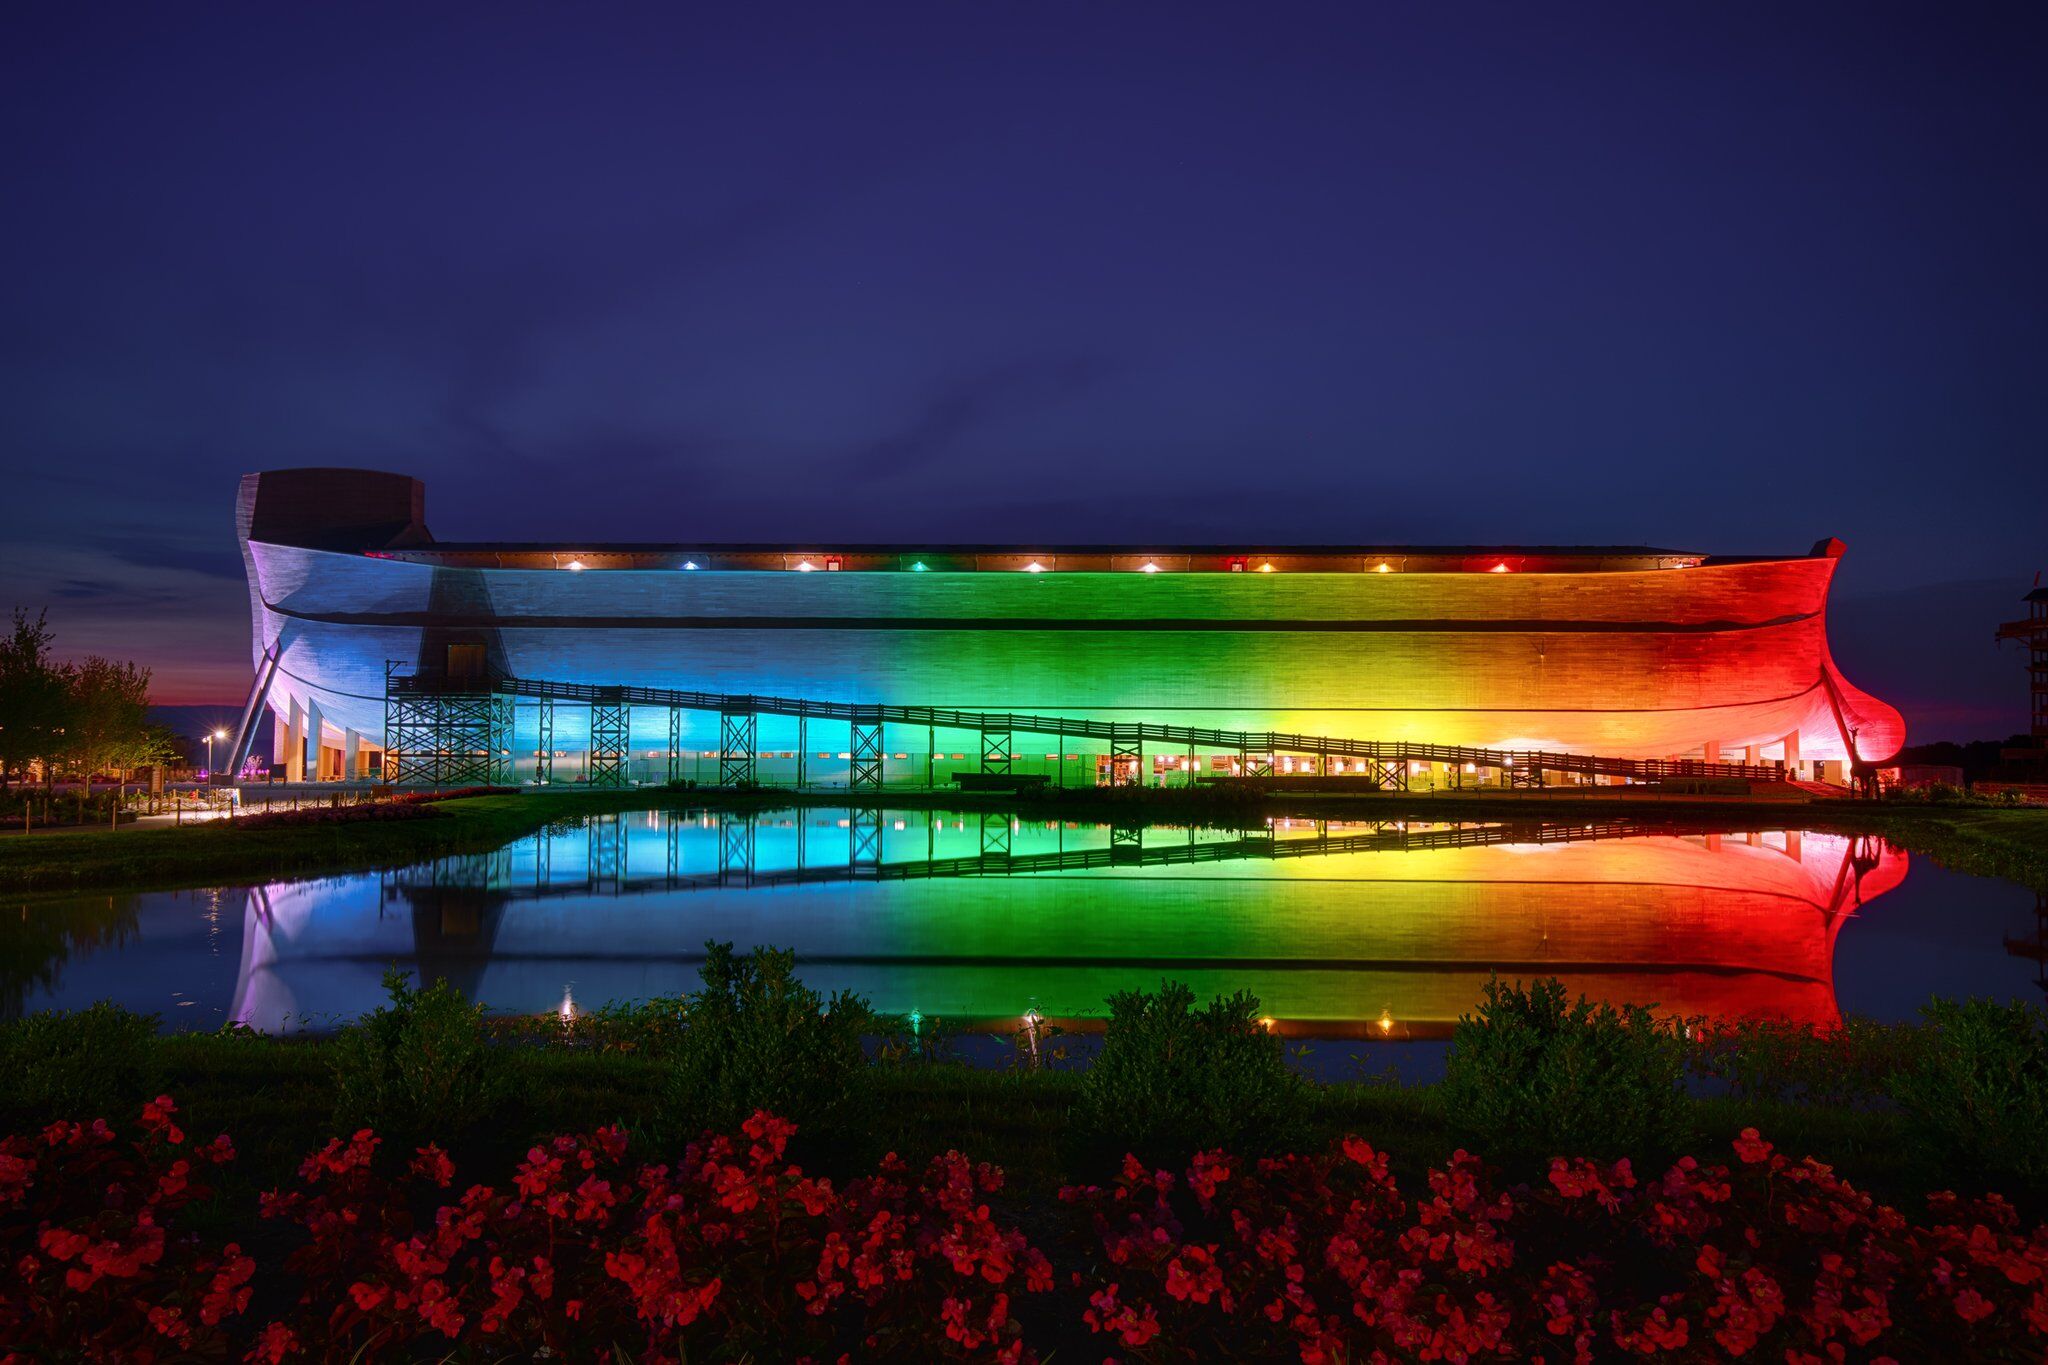 The Ark Encounter lit up in rainbow colors - but to "reclaim" the rainbow from LGBTQ people, not in their support